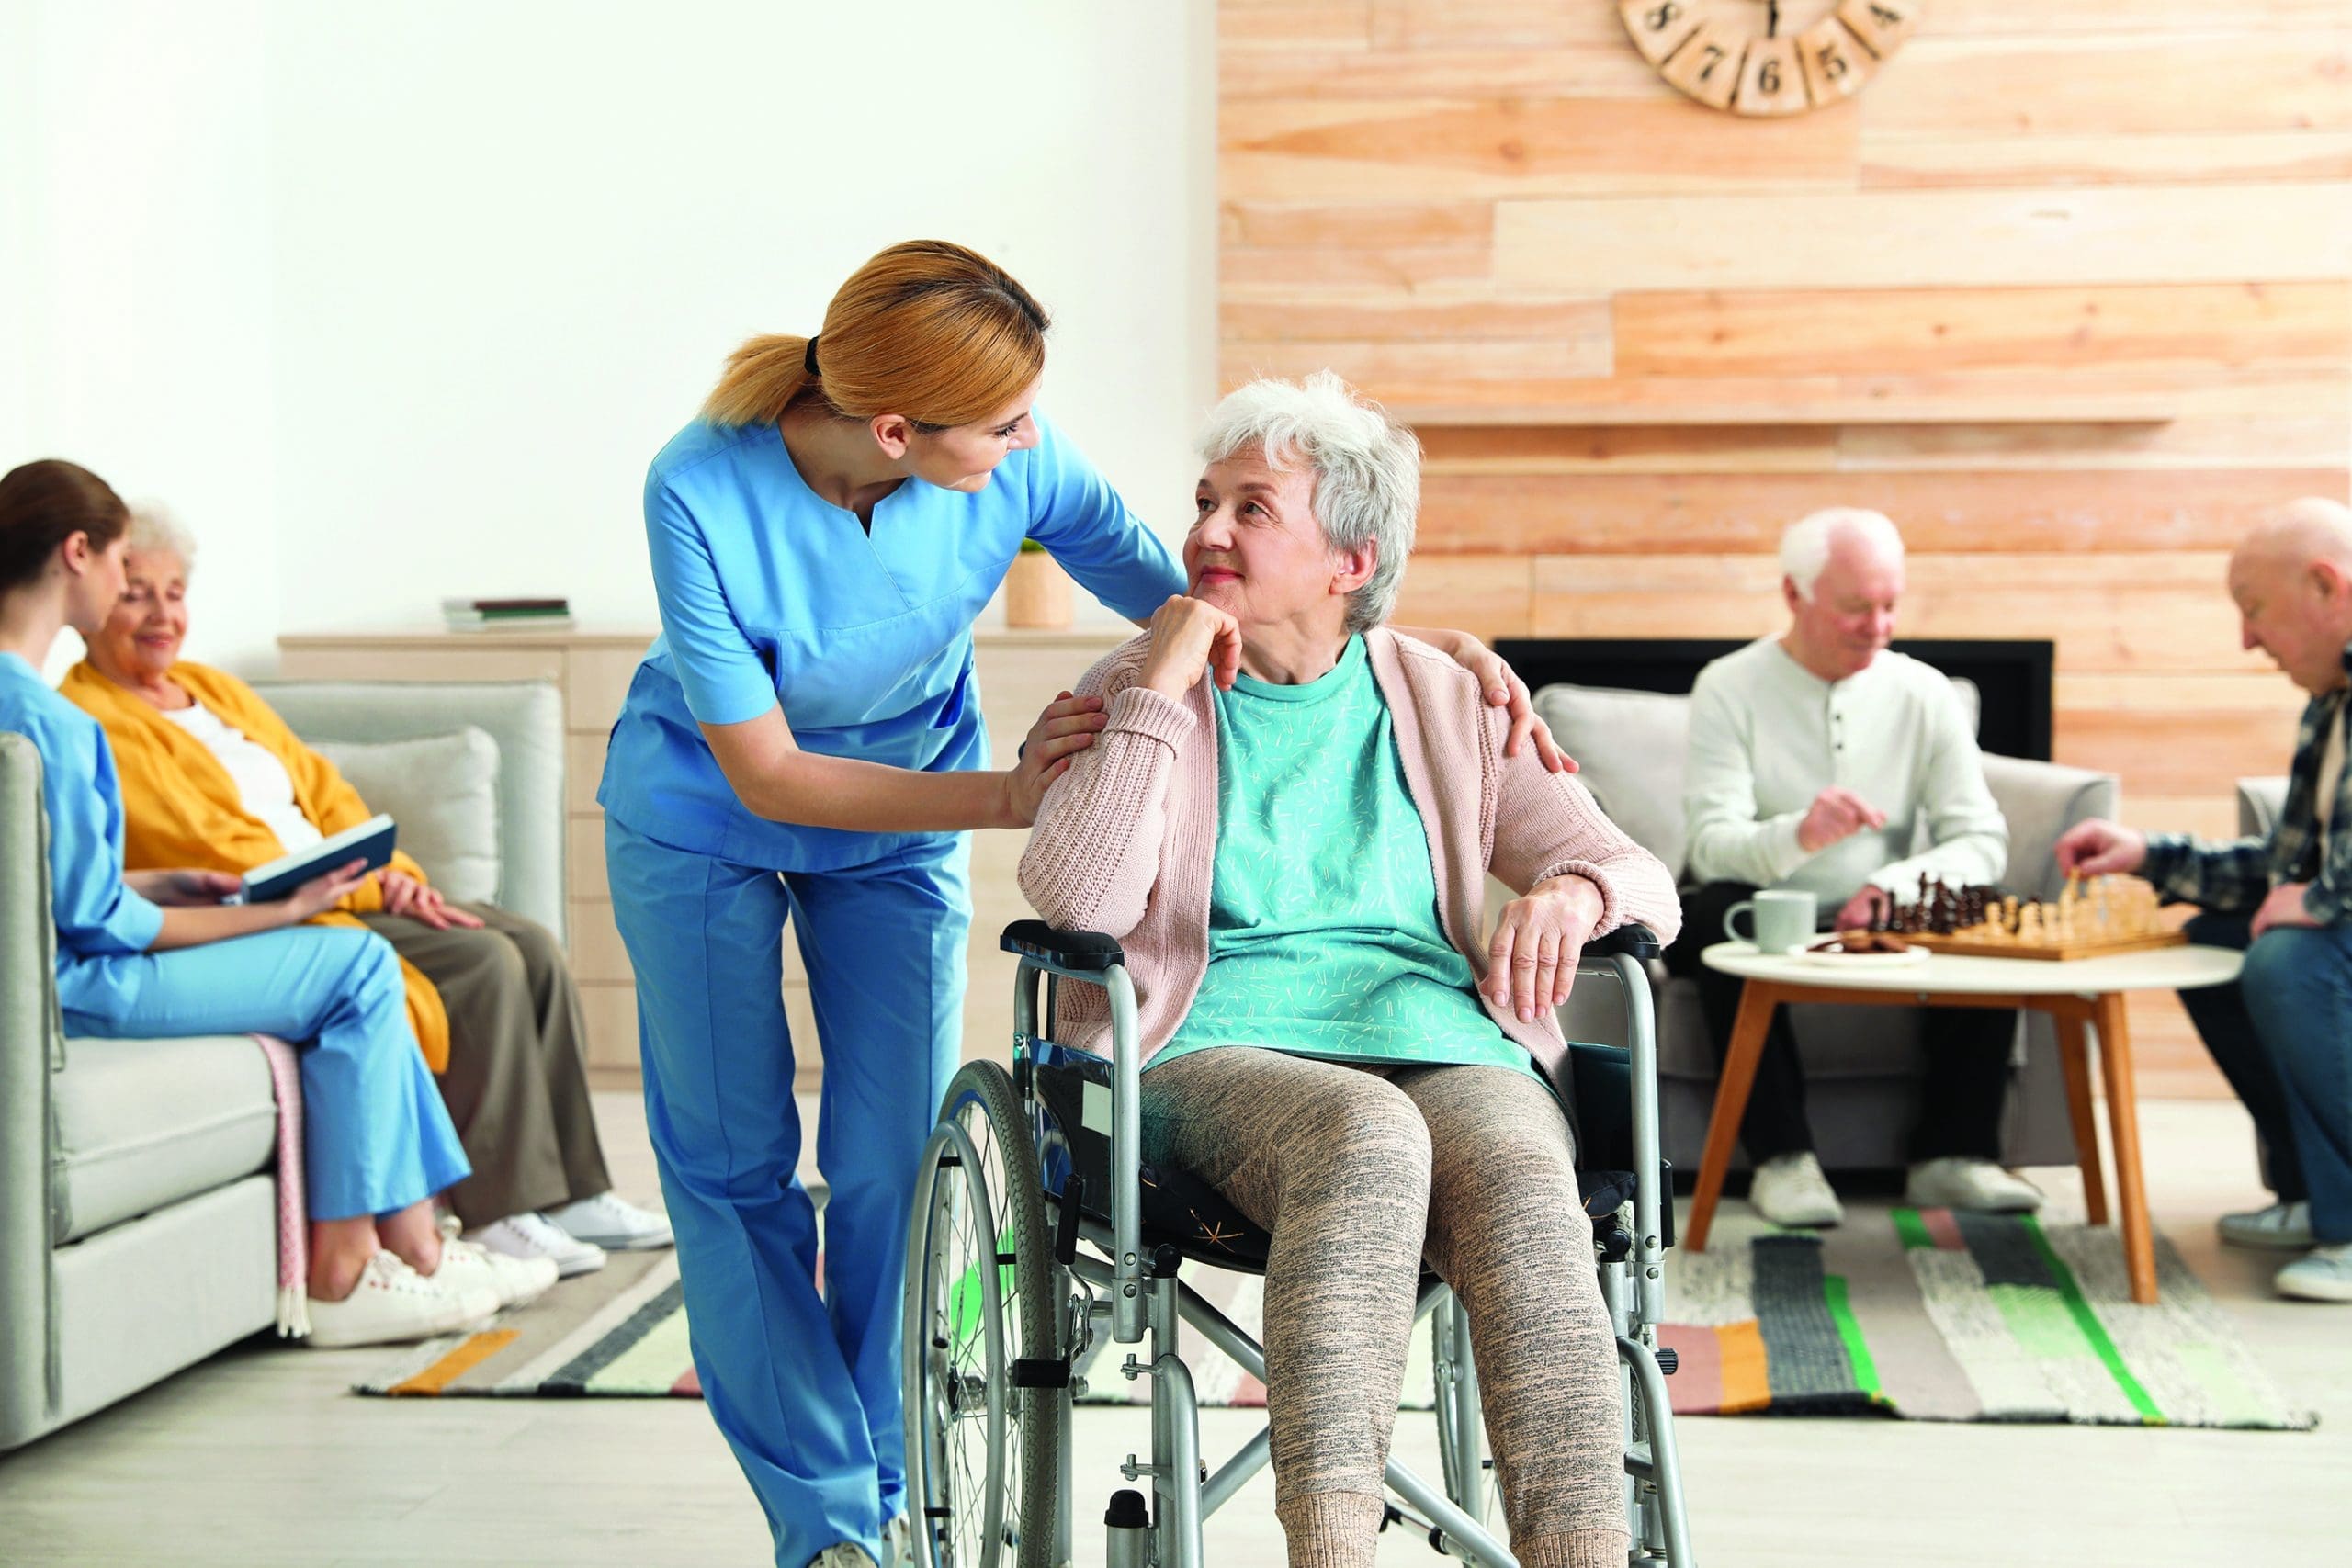 Pathway to Excellence in long-term care organizations